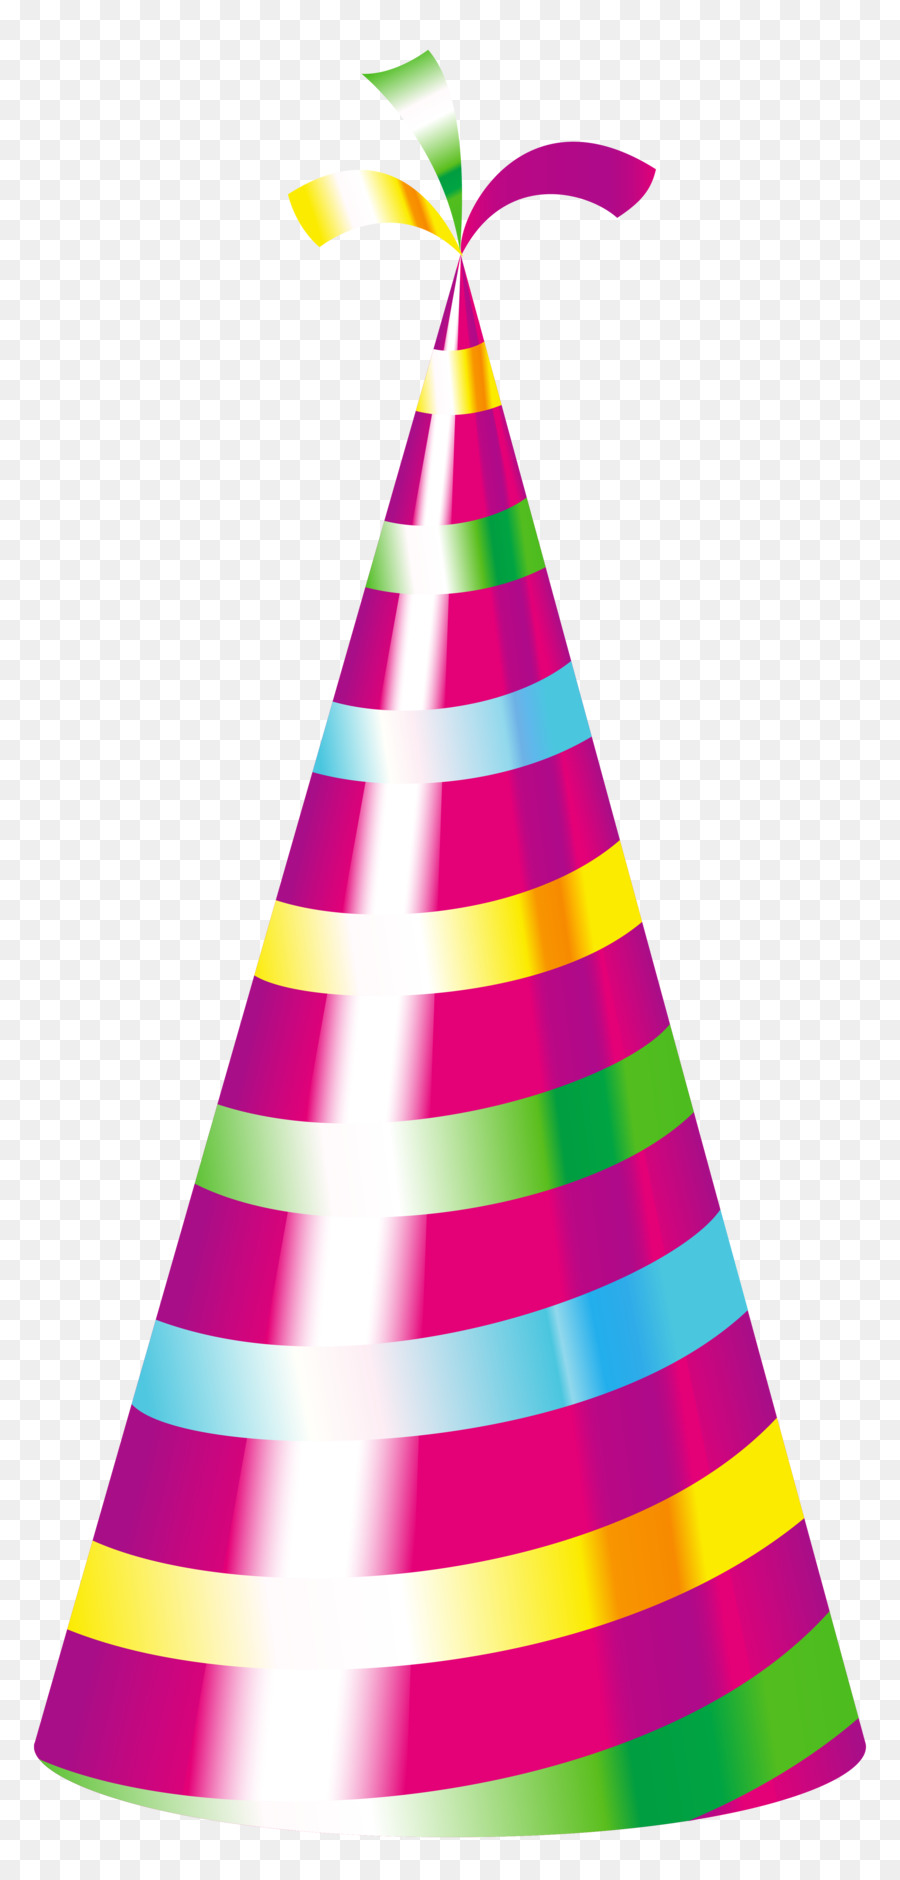 Birthday cake Party hat Clip art - party png download - 3015*6279 - Free Transparent Birthday Cake png Download.